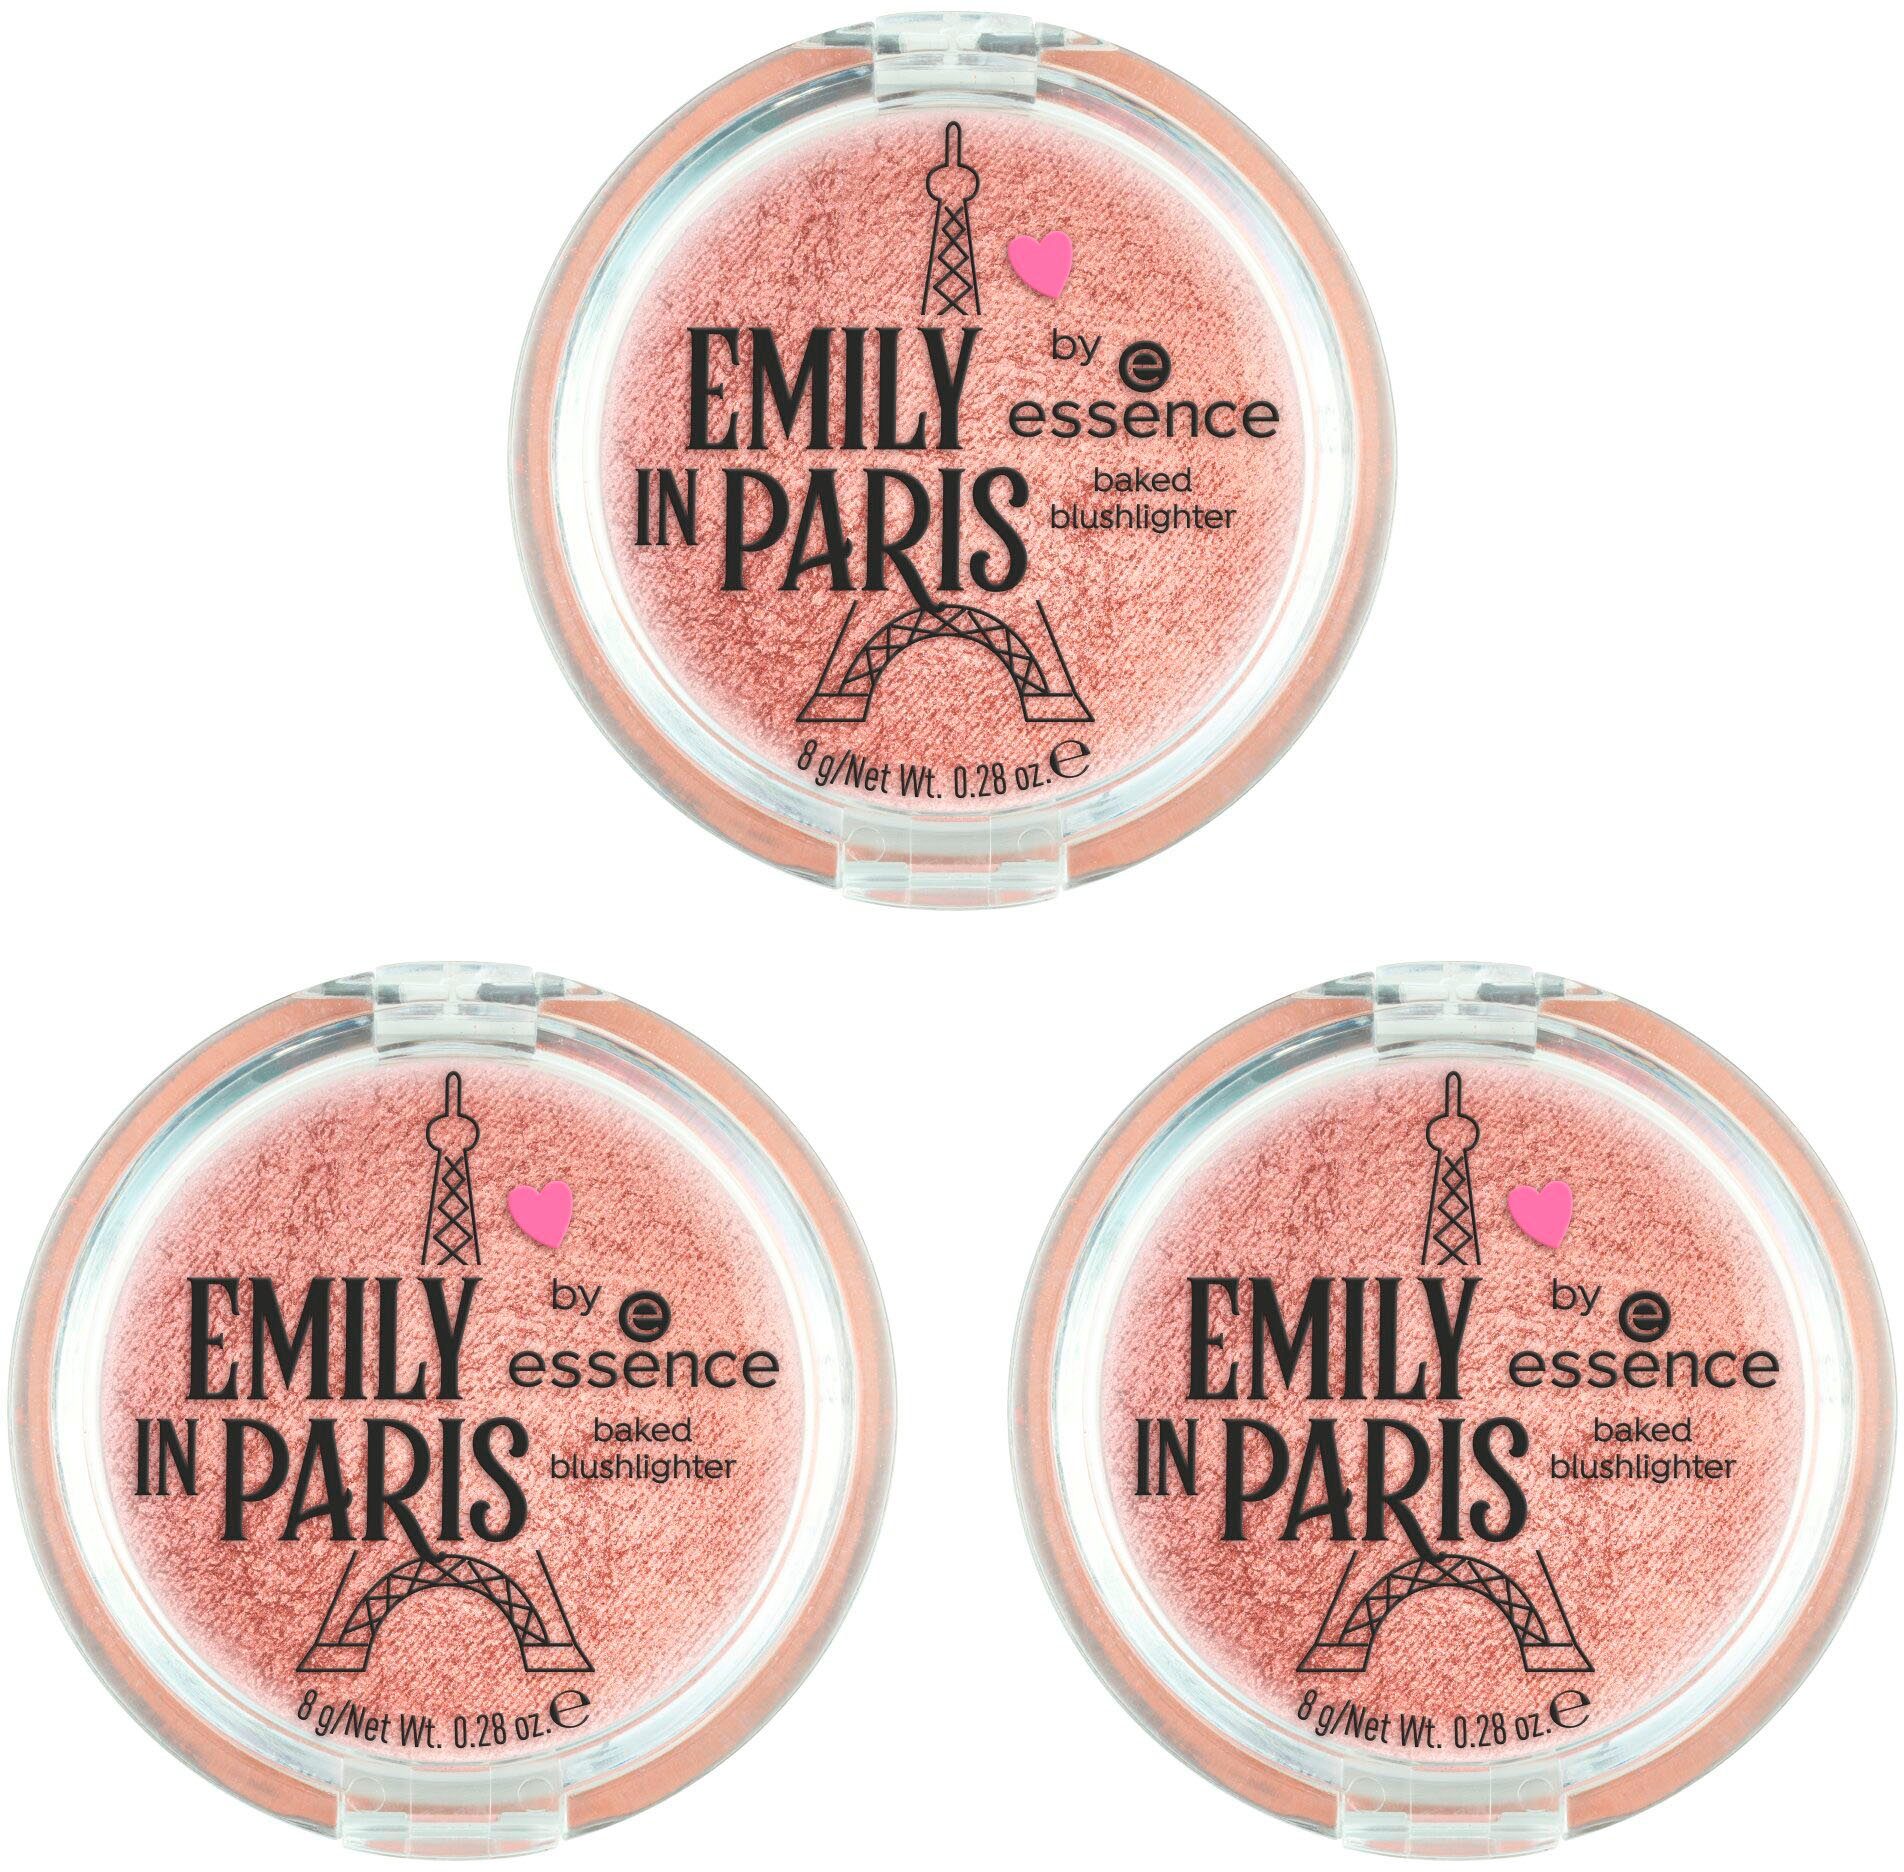 EMILY baked essence Rouge PARIS by IN blushlighter Essence